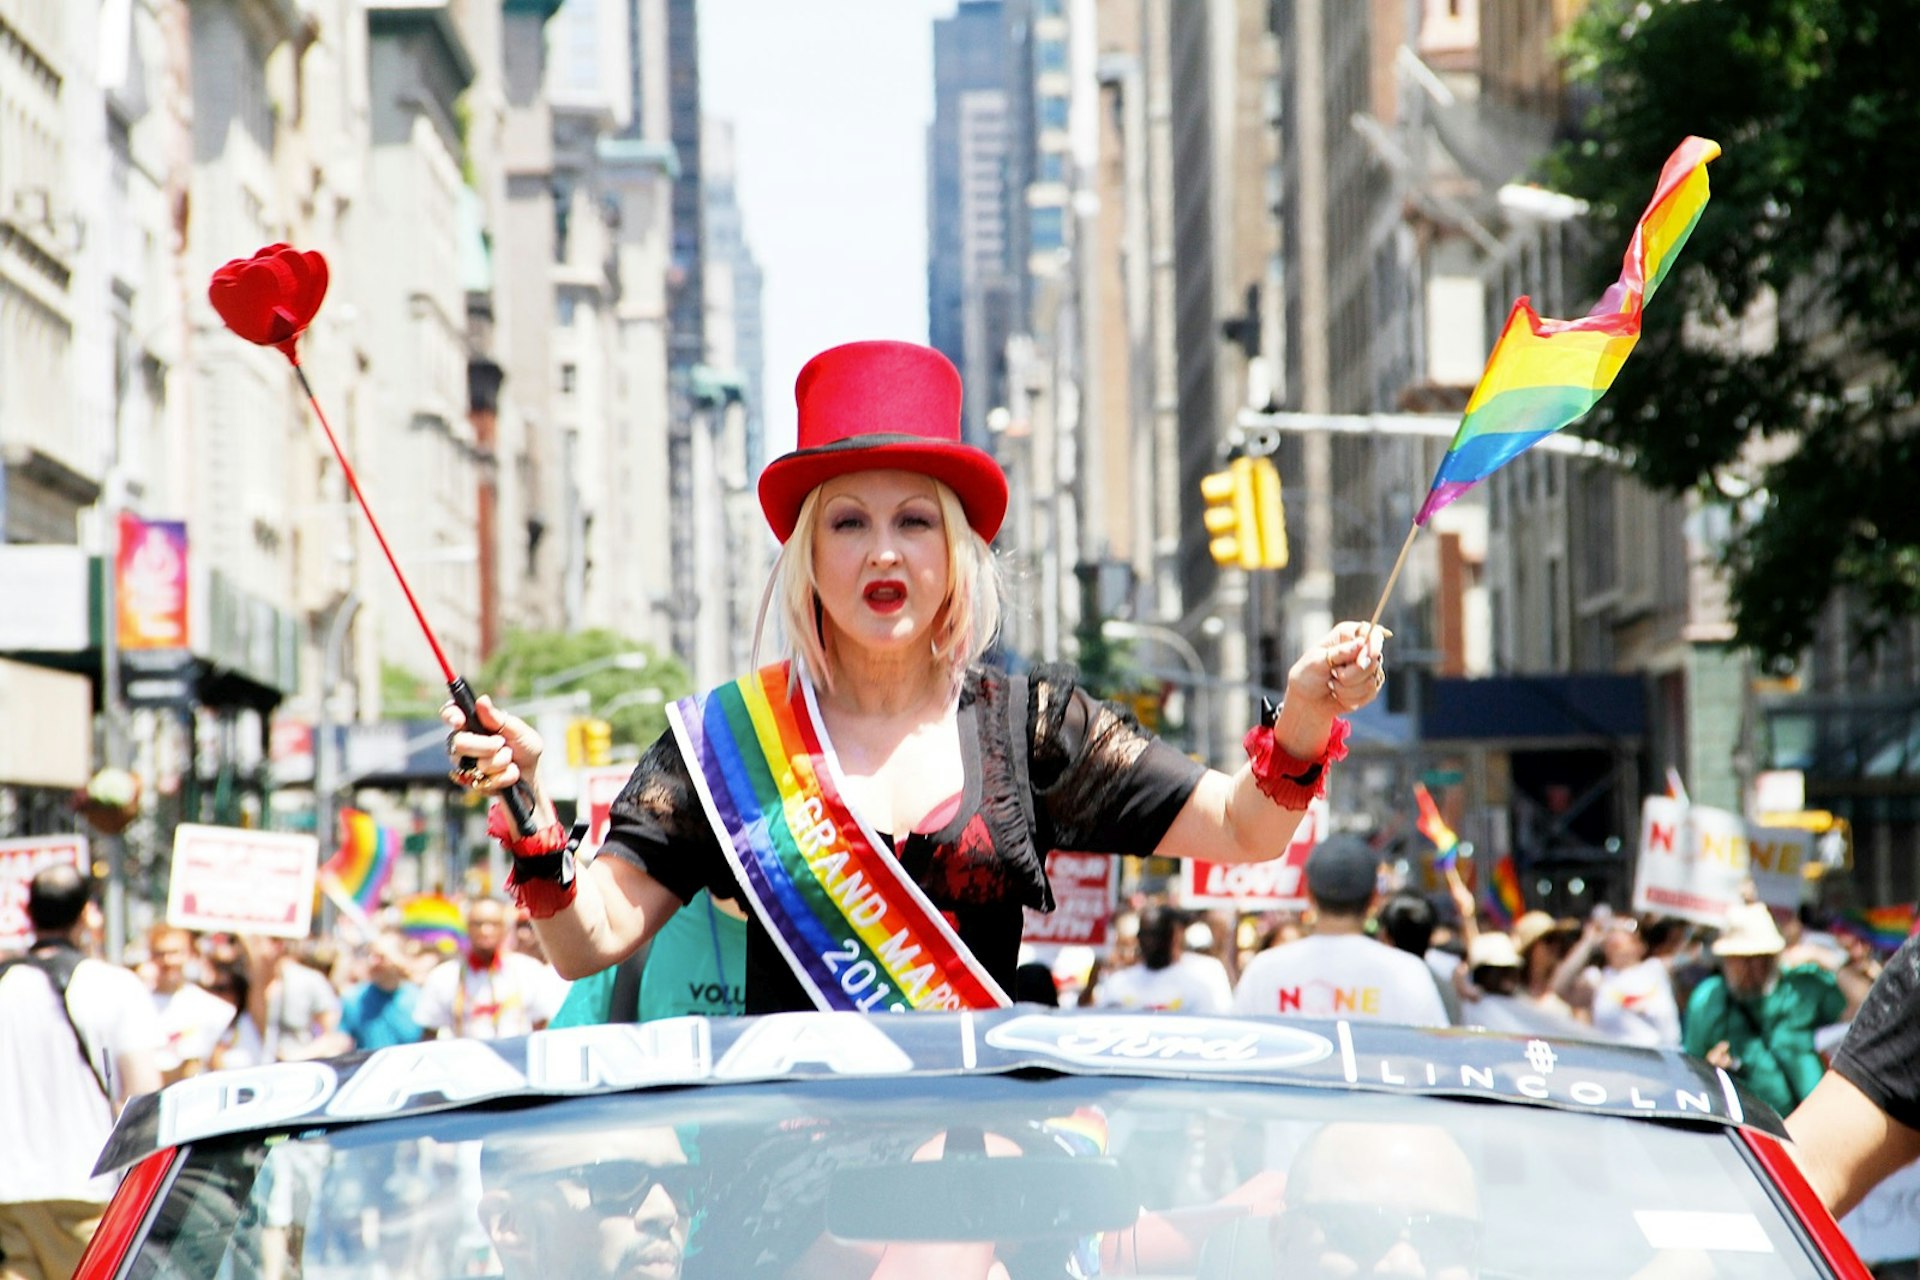 Musical artist Cyndi Lauper wears a red top hat while holding a rainbow flag and a large plastic rose as she sits in a convertible car during the New York City Pride parade. Lauper will be among the many musical acts performing at NYC WorldPride. 